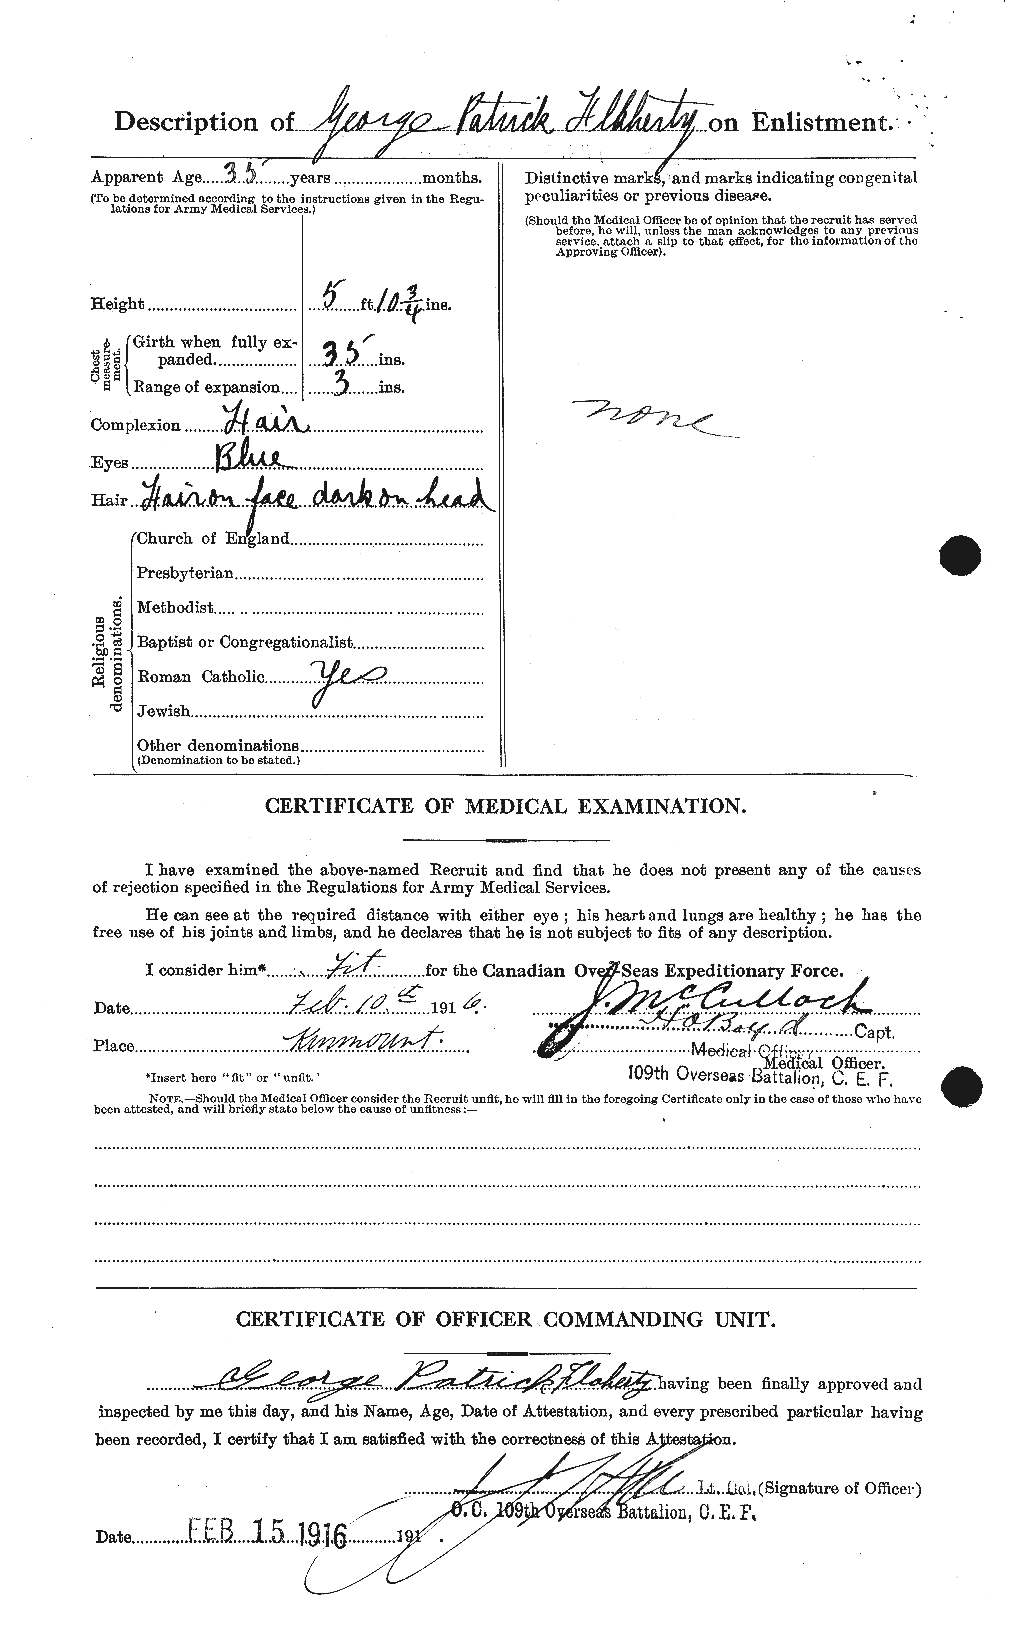 Personnel Records of the First World War - CEF 323358b